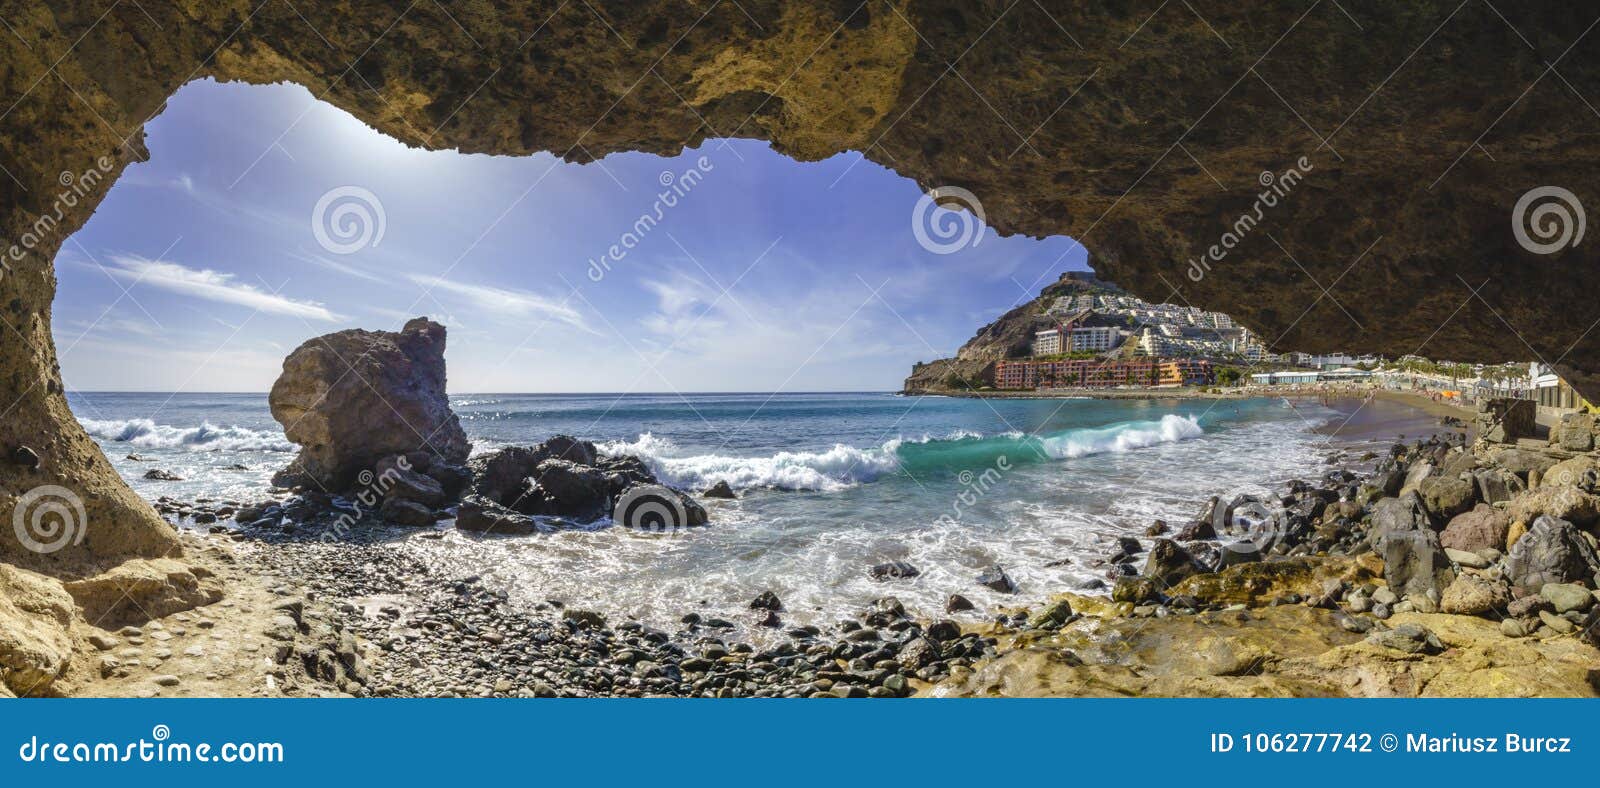 natural rock grotto on the beach on playa del cura, near playa a